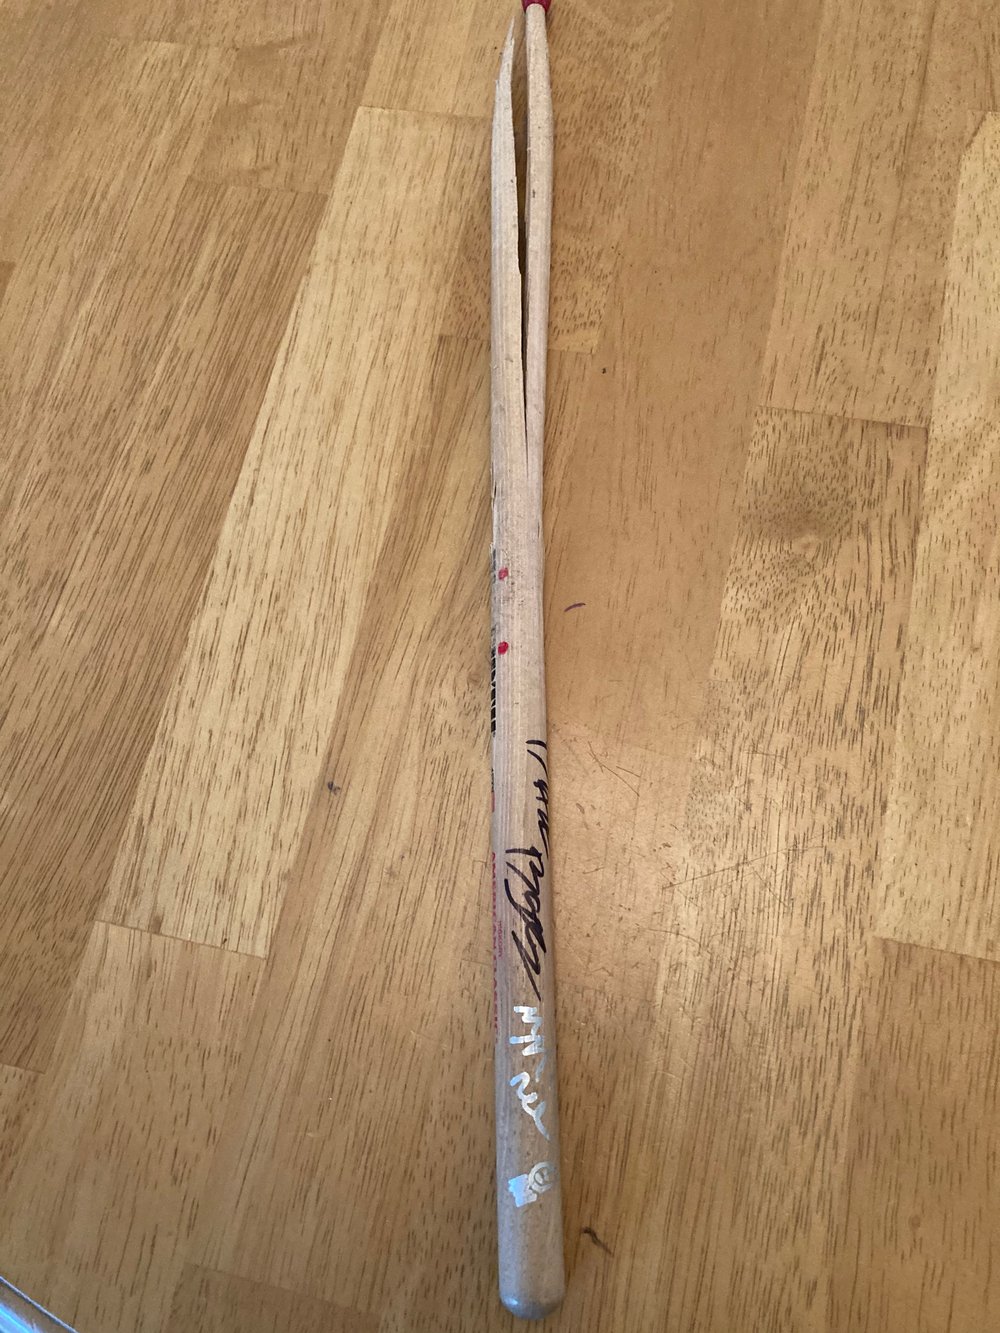 Signed Drum stick used by Martin 